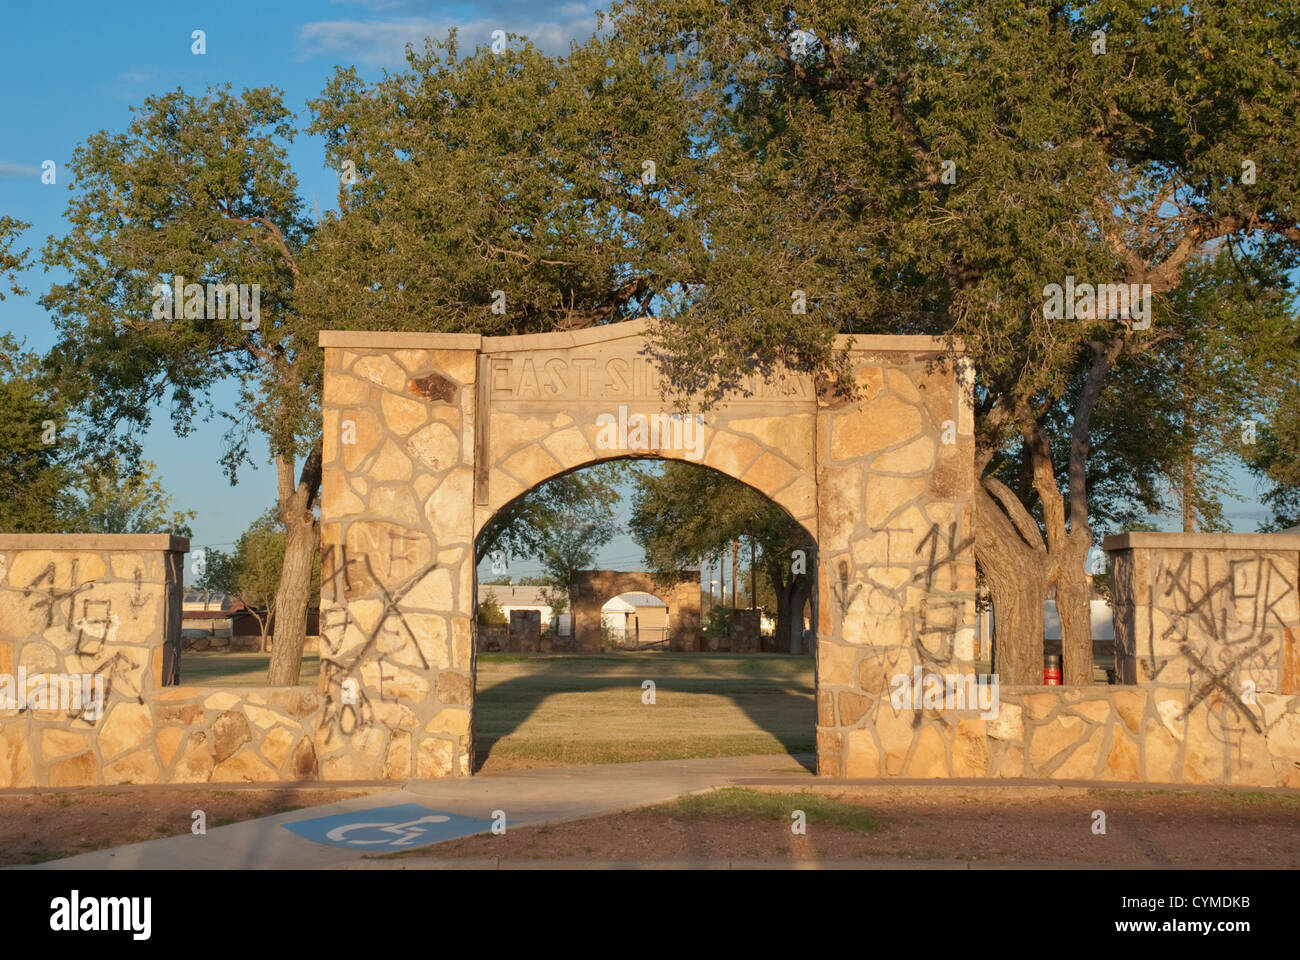 The East Side Park is one of many nice small neighborhood parks in Tucumcari, New Mexico. Stock Photo